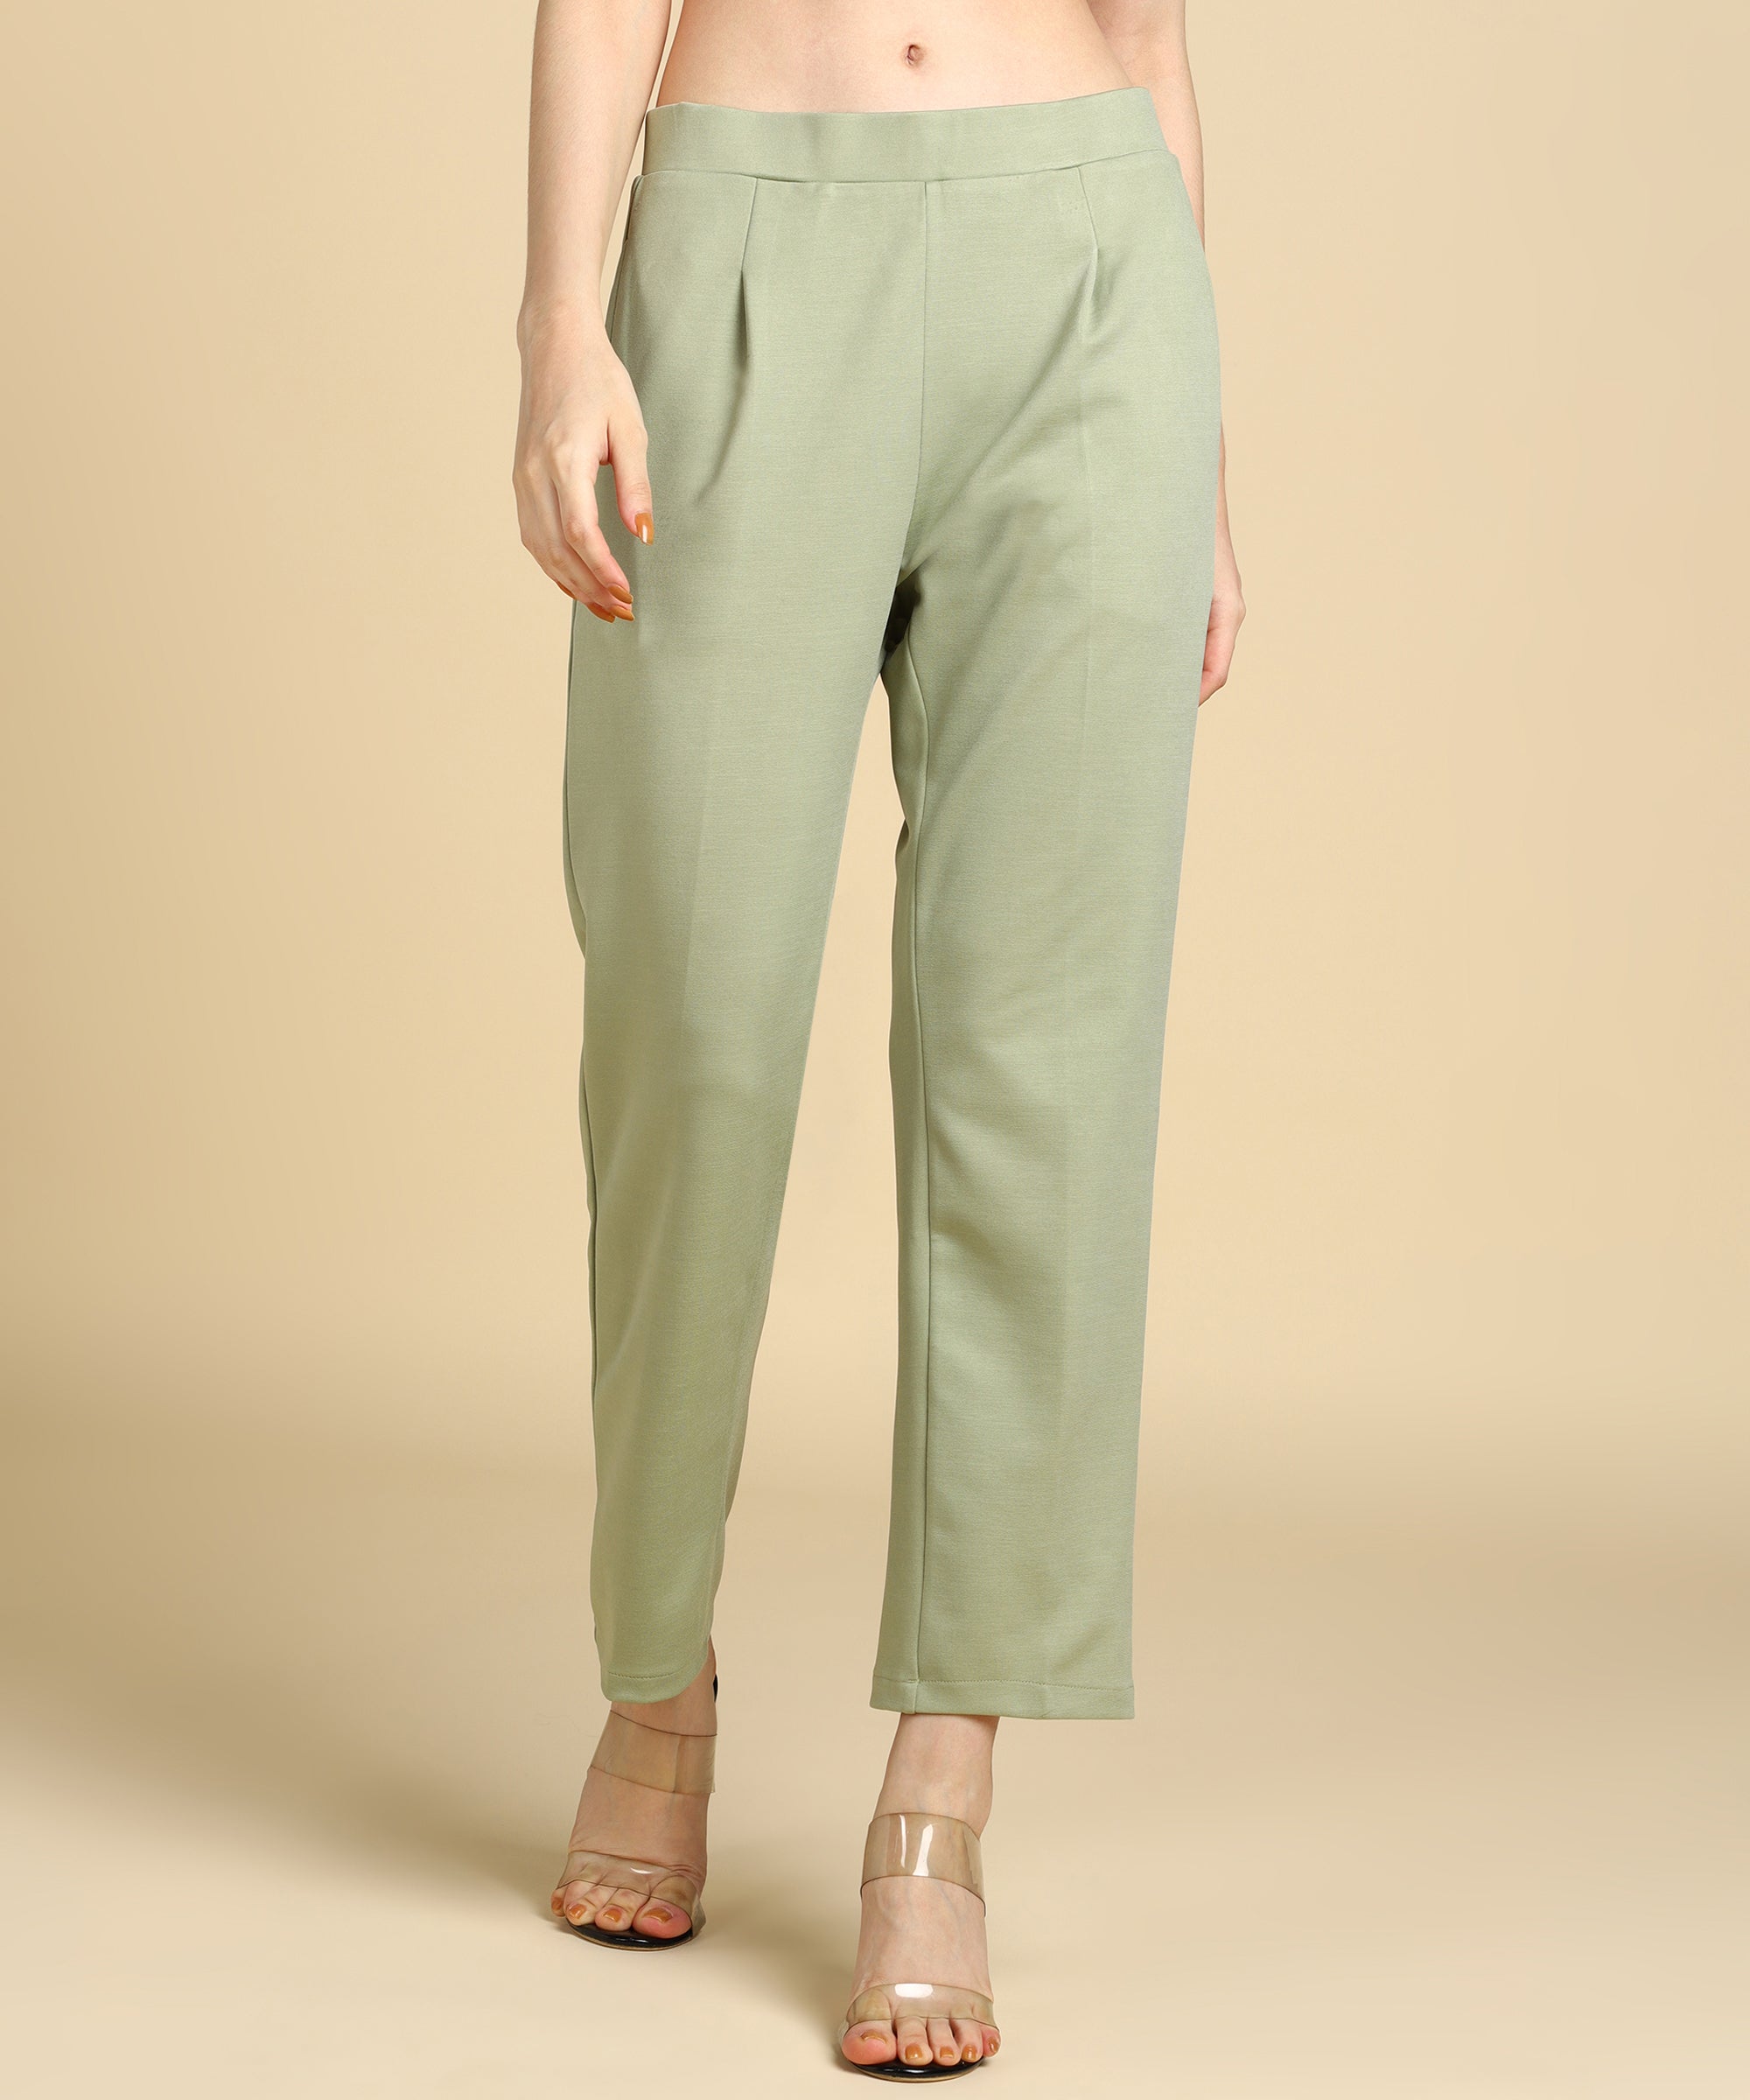 Women's High Waist Formal Stretchable Relaxed Parallel Trouser Pants - 694  - EFab Enterprises at Rs 749.00, New Delhi | ID: 2852228879648